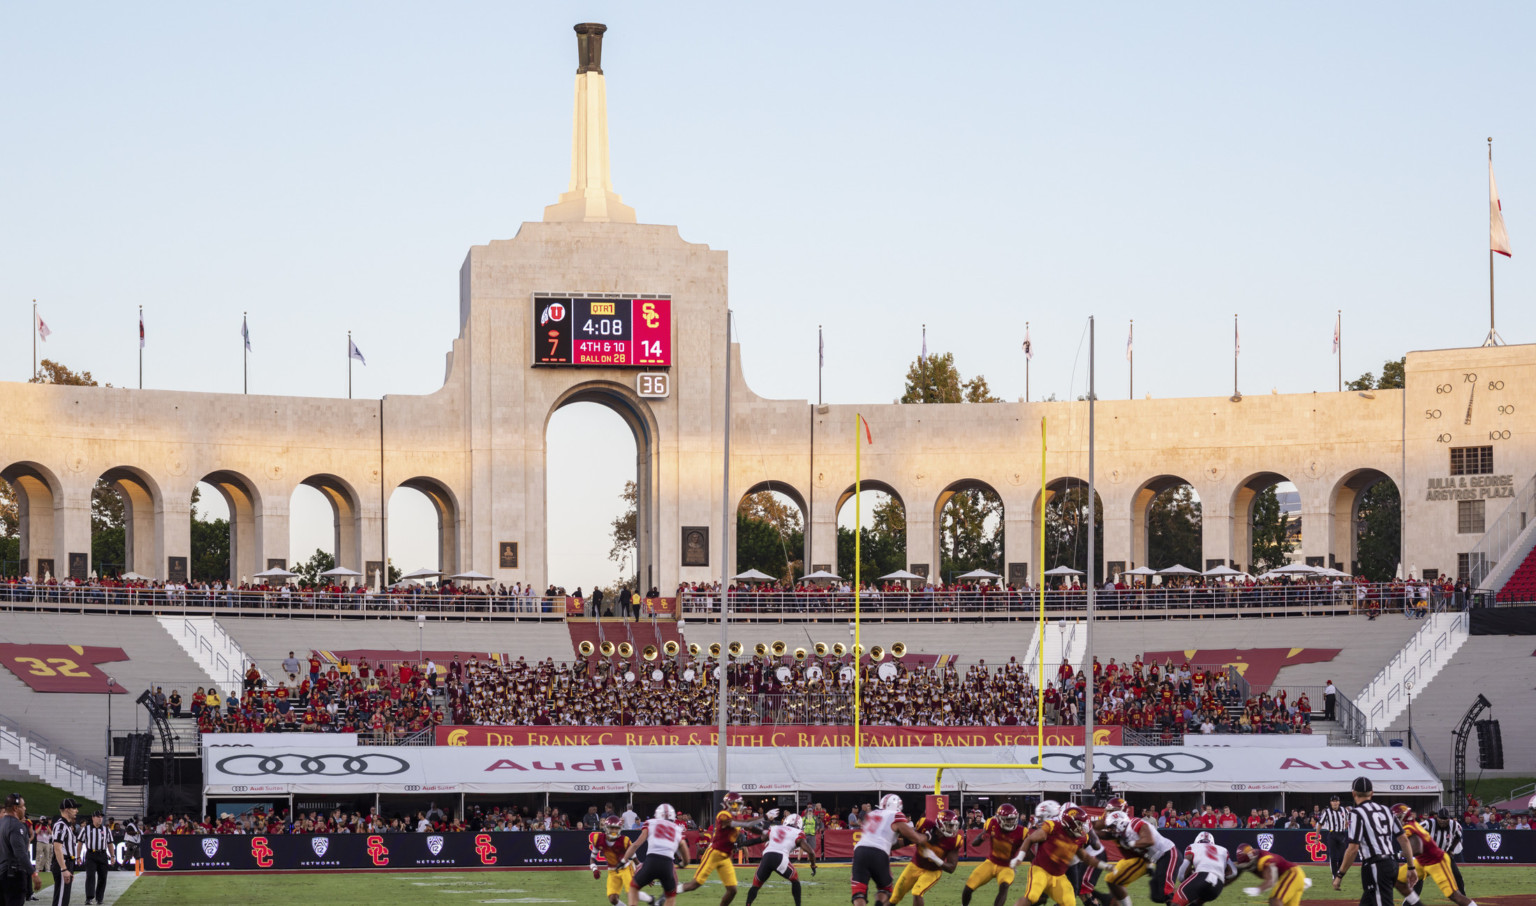 Entry concourse of Los Angeles Memorial Coliseum with central tower and Olympic Cauldron on top of a spire